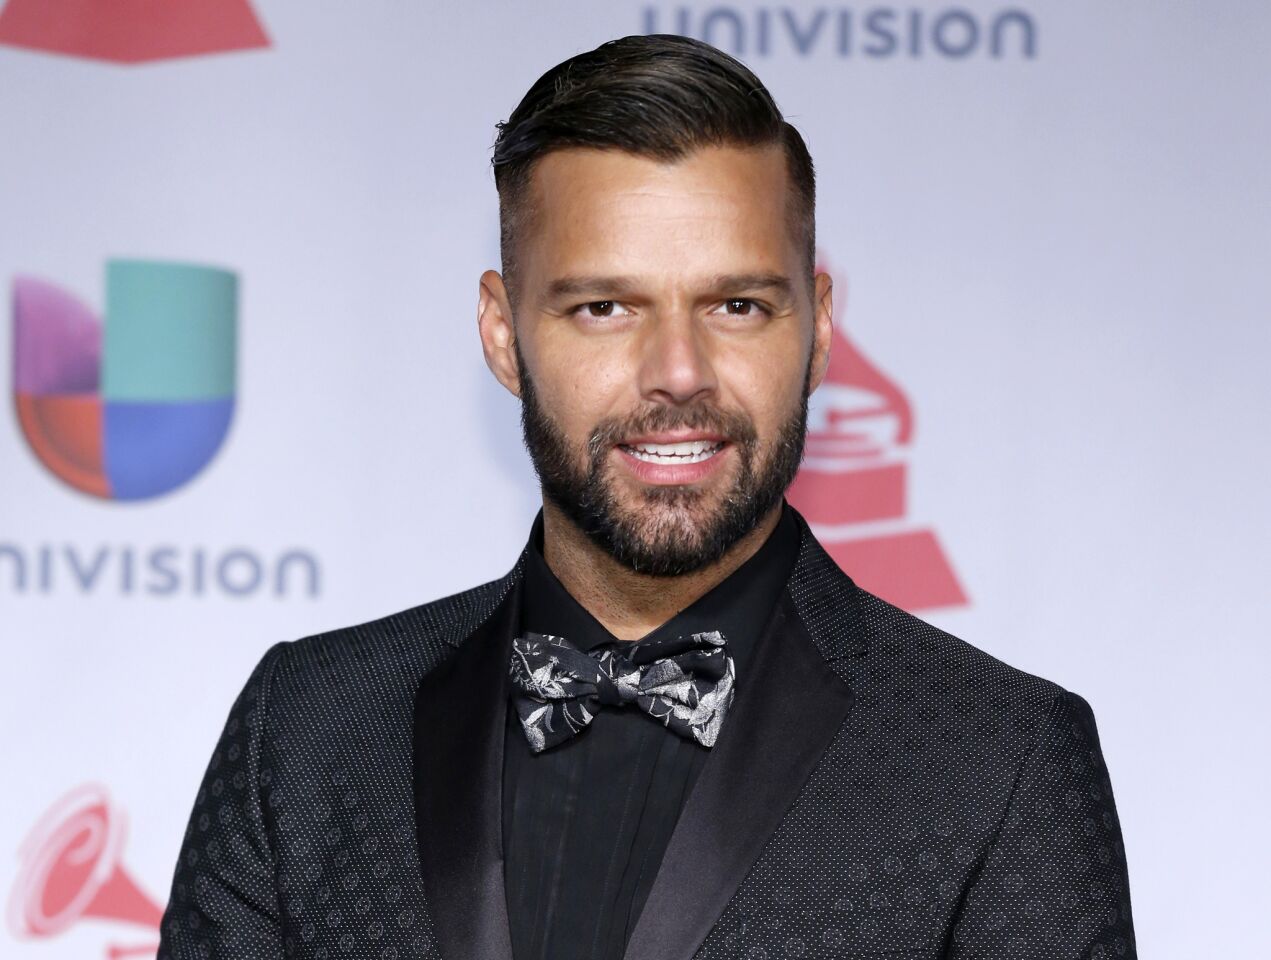 Ricky Martin ended years of media speculation when he published an open letter in Spanish and English to fans on his personal website.